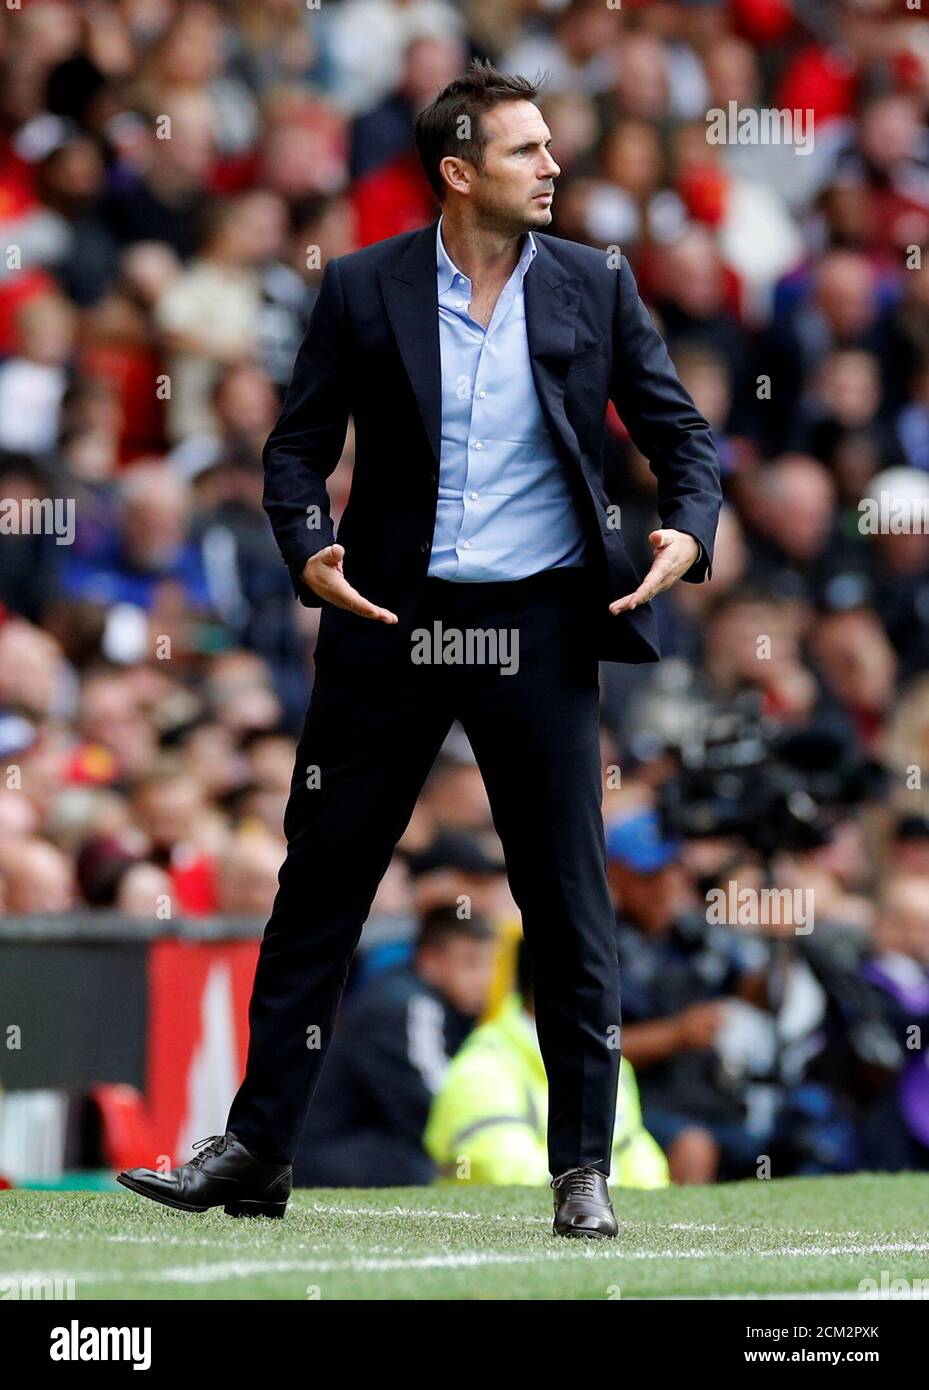 Soccer Football - Premier League - Manchester United v Chelsea - Old Trafford, Manchester, Britain - August 11, 2019  Chelsea manager Frank Lampard during the match  REUTERS/Phil Noble  EDITORIAL USE ONLY. No use with unauthorized audio, video, data, fixture lists, club/league logos or 'live' services. Online in-match use limited to 75 images, no video emulation. No use in betting, games or single club/league/player publications.  Please contact your account representative for further details. Stock Photo